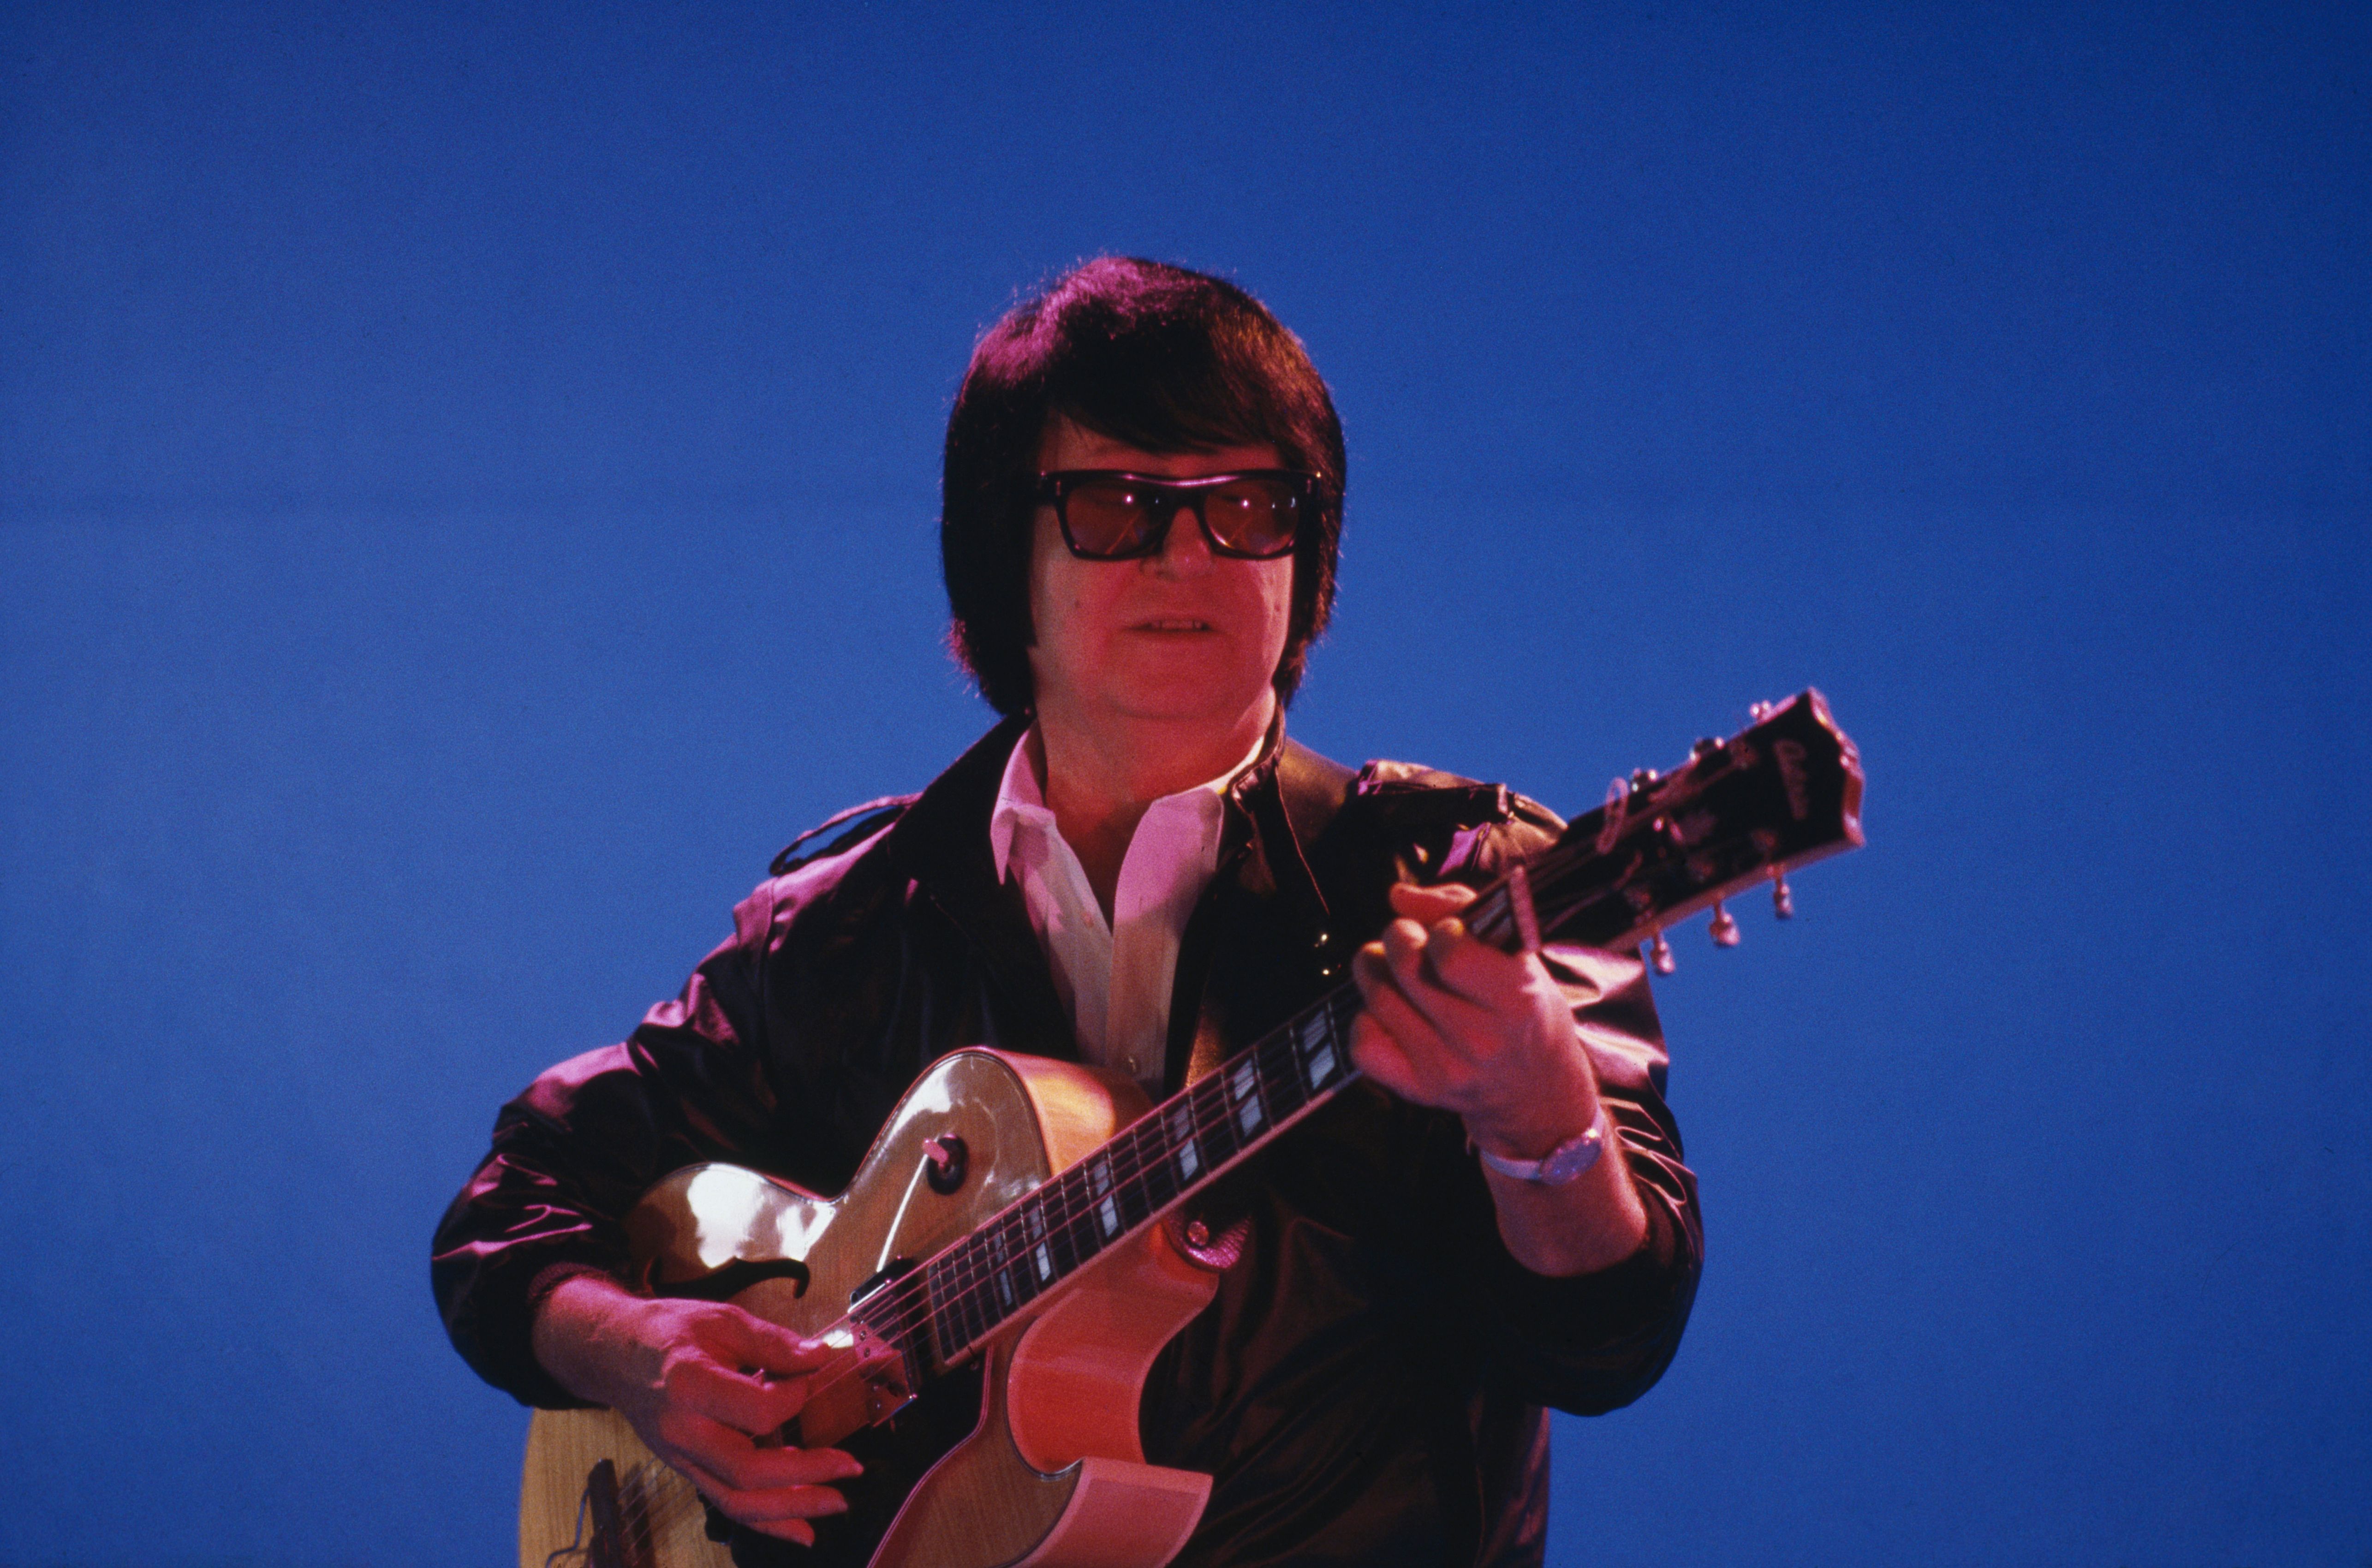 Roy Orbison performs on stage, circa 1980. | Source: Getty Images